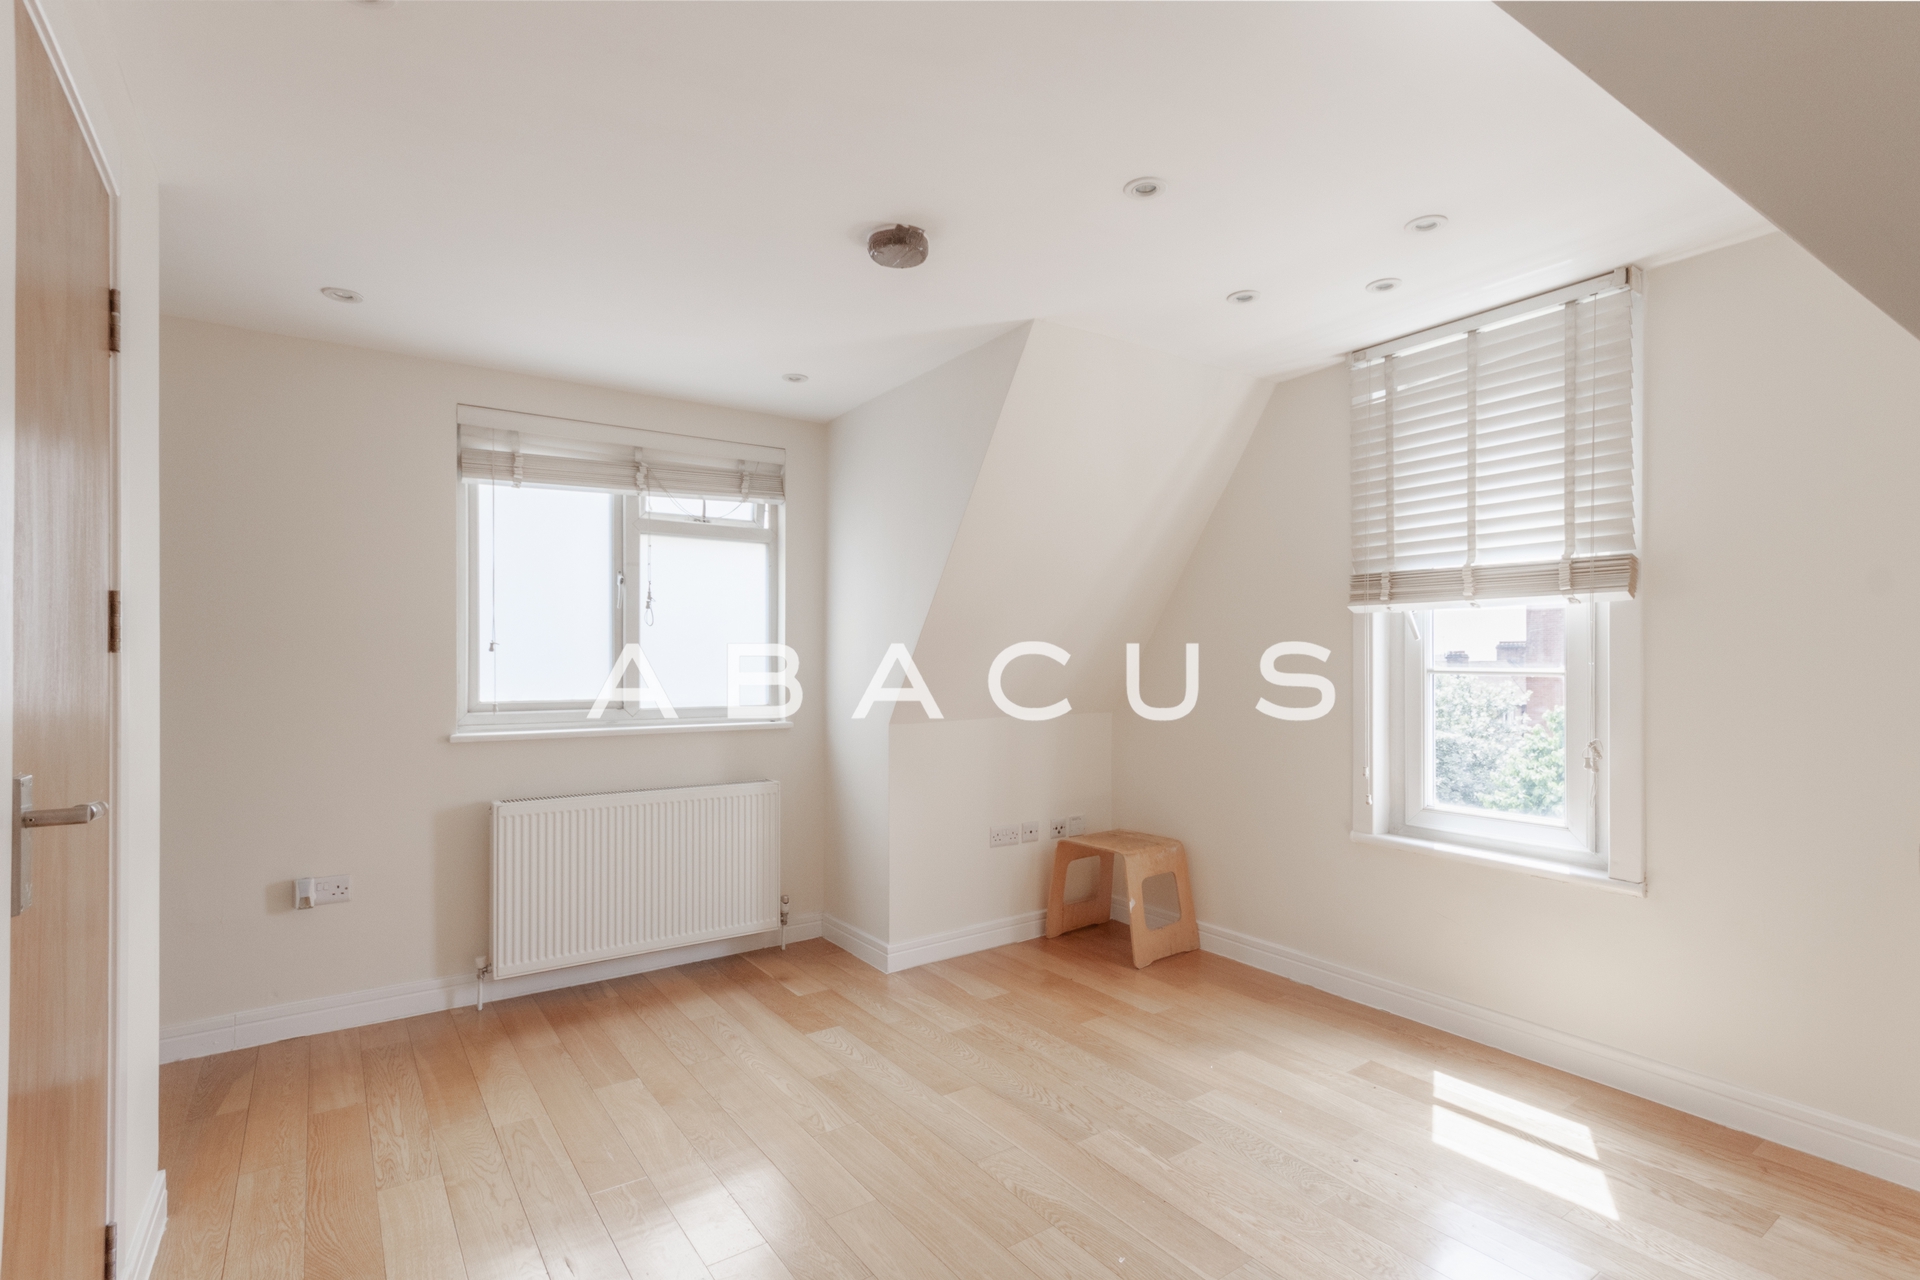 1 Bedroom Flat to rent in West Hampstead, London, NW6